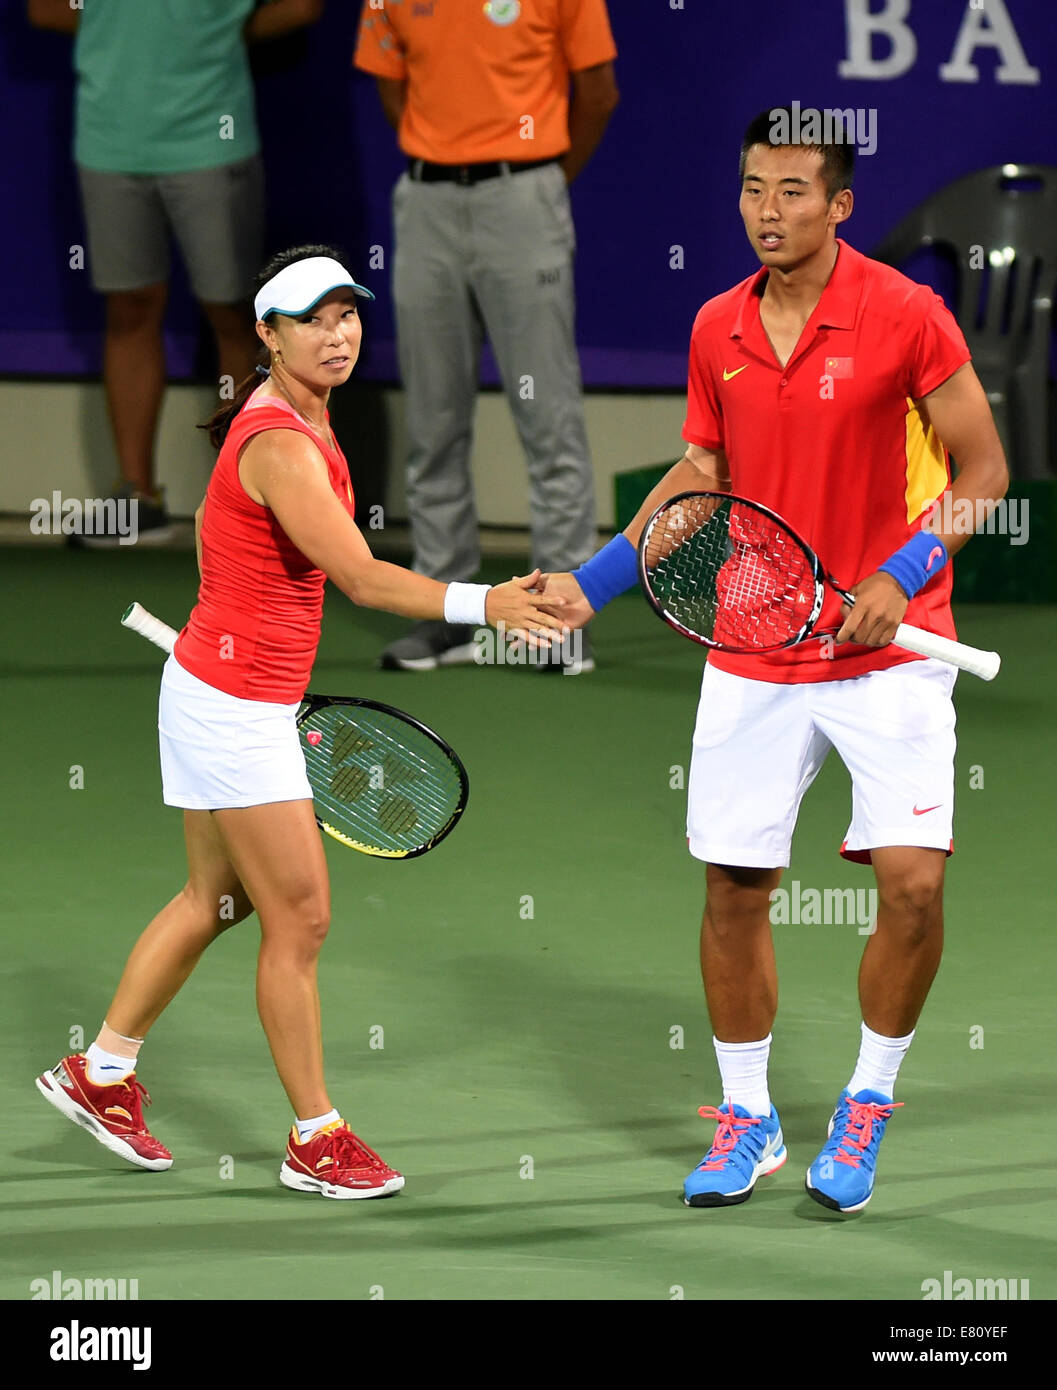 Veilig Hulpeloosheid vangst Incheon, South Korea. 28th Sep, 2014. Zheng Jie (L) and Zhang Ze of China  compete during the mixed doubles semifinal match of tennis against Mirza  Sania and Myneni Saketh Sai of India